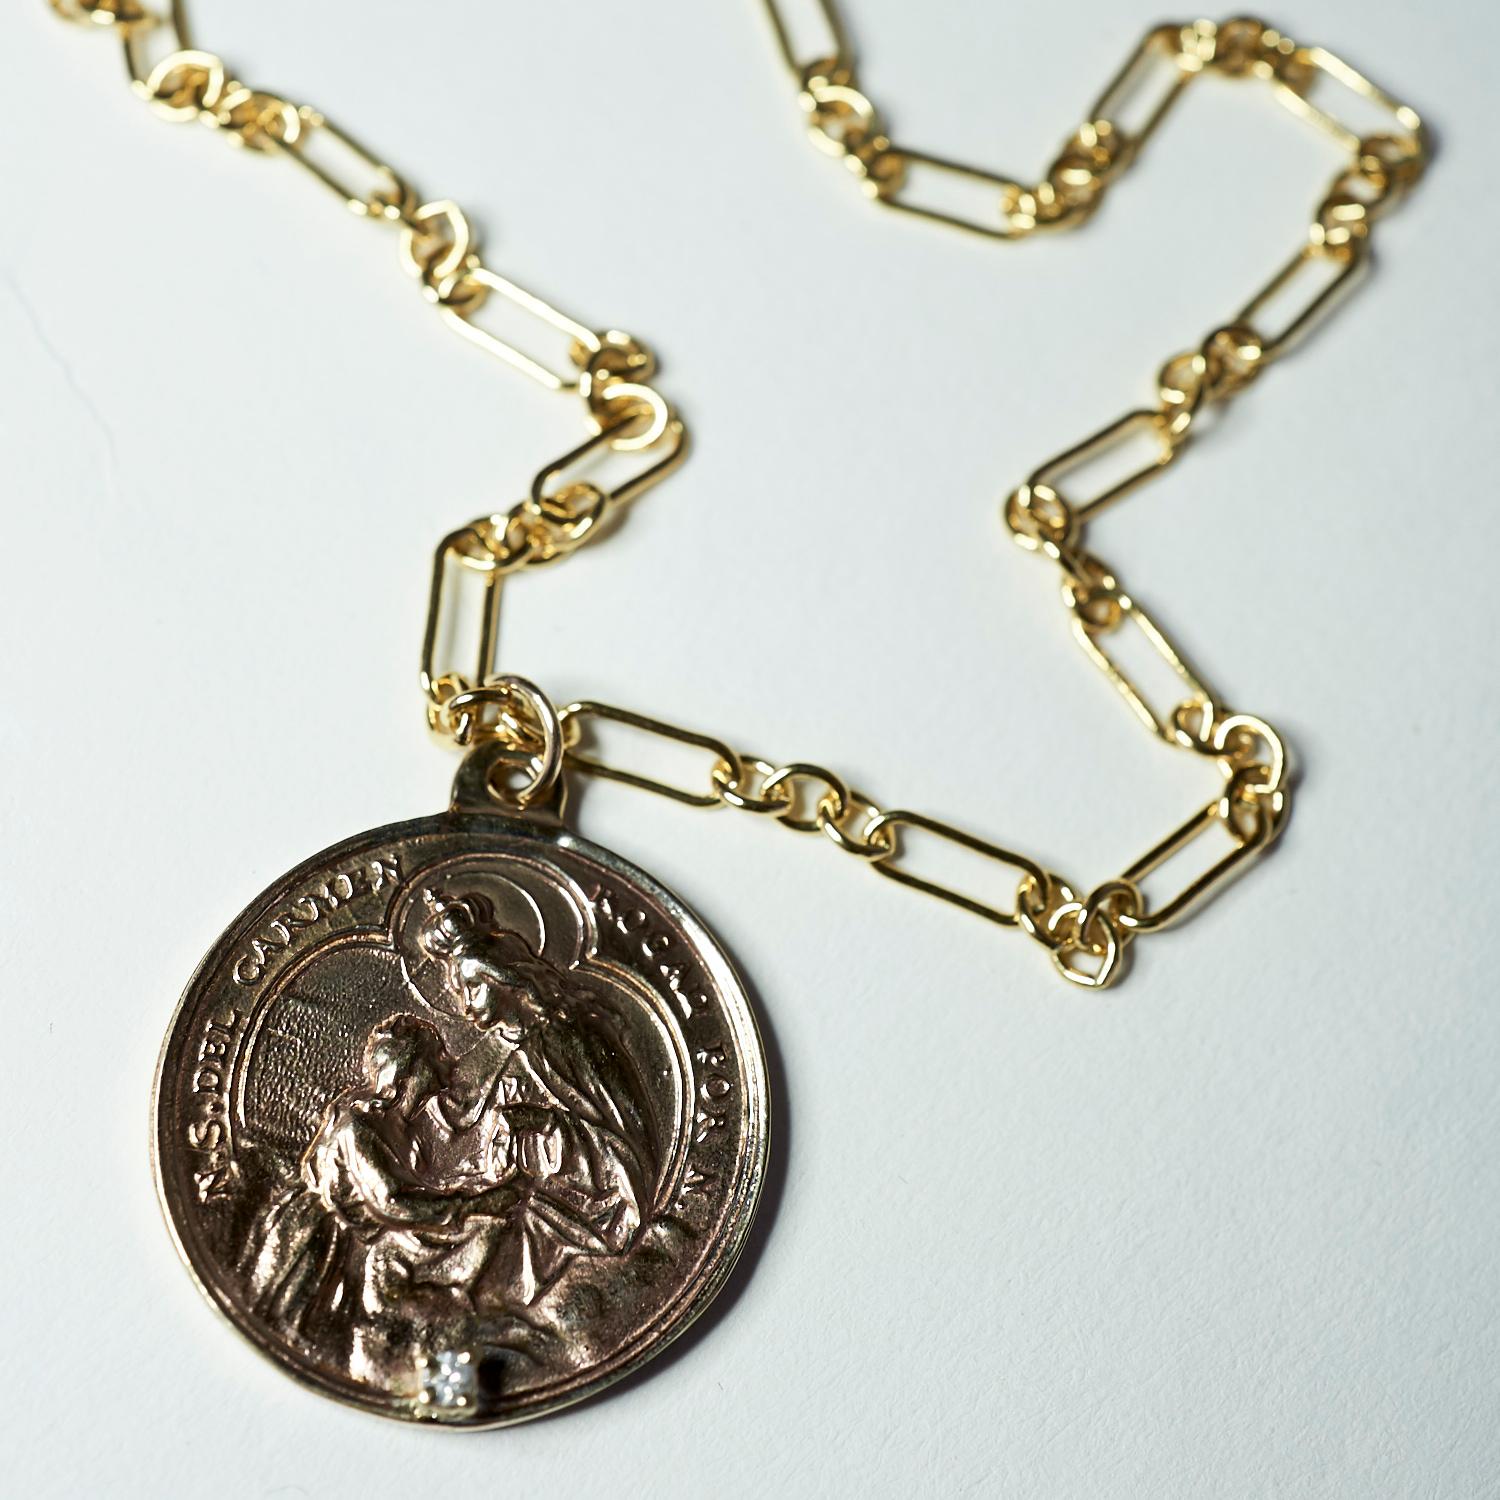 Women's Diamond Virgin Mary Medal Coin Pendant Chain Necklace J Dauphin For Sale